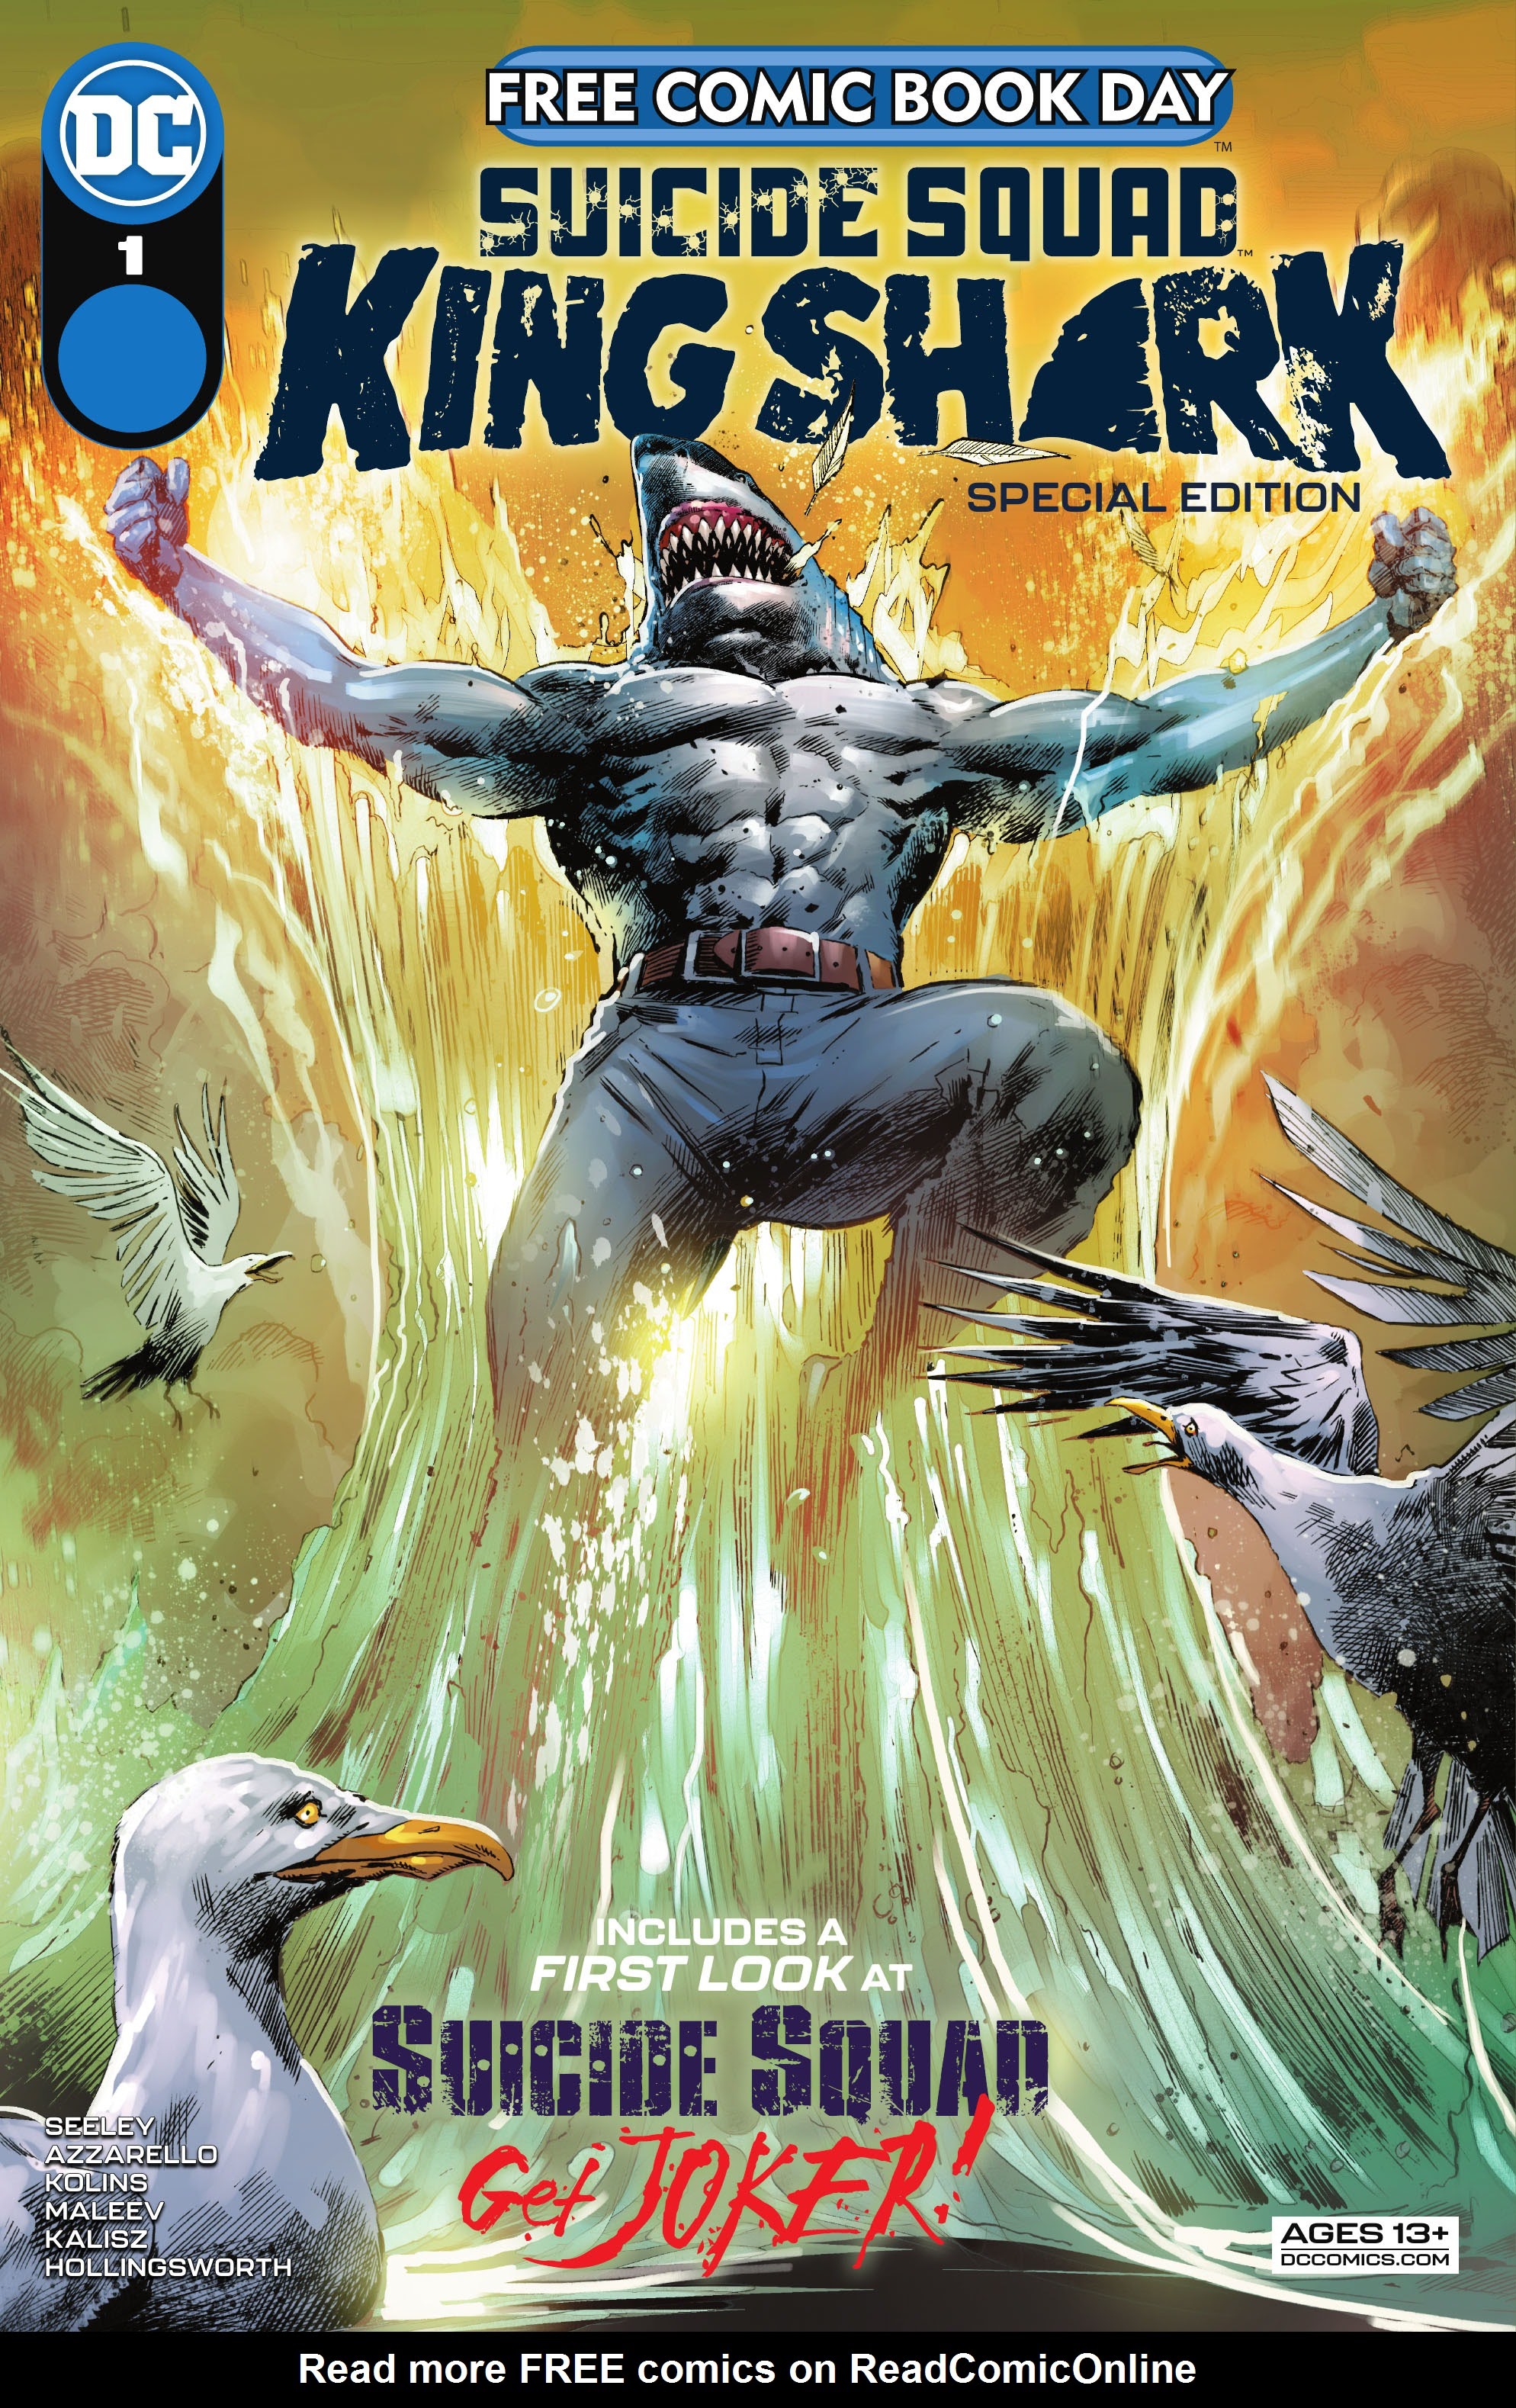 Read online Free Comic Book Day 2021 comic -  Issue # Suicide Squad Special Edition - 1